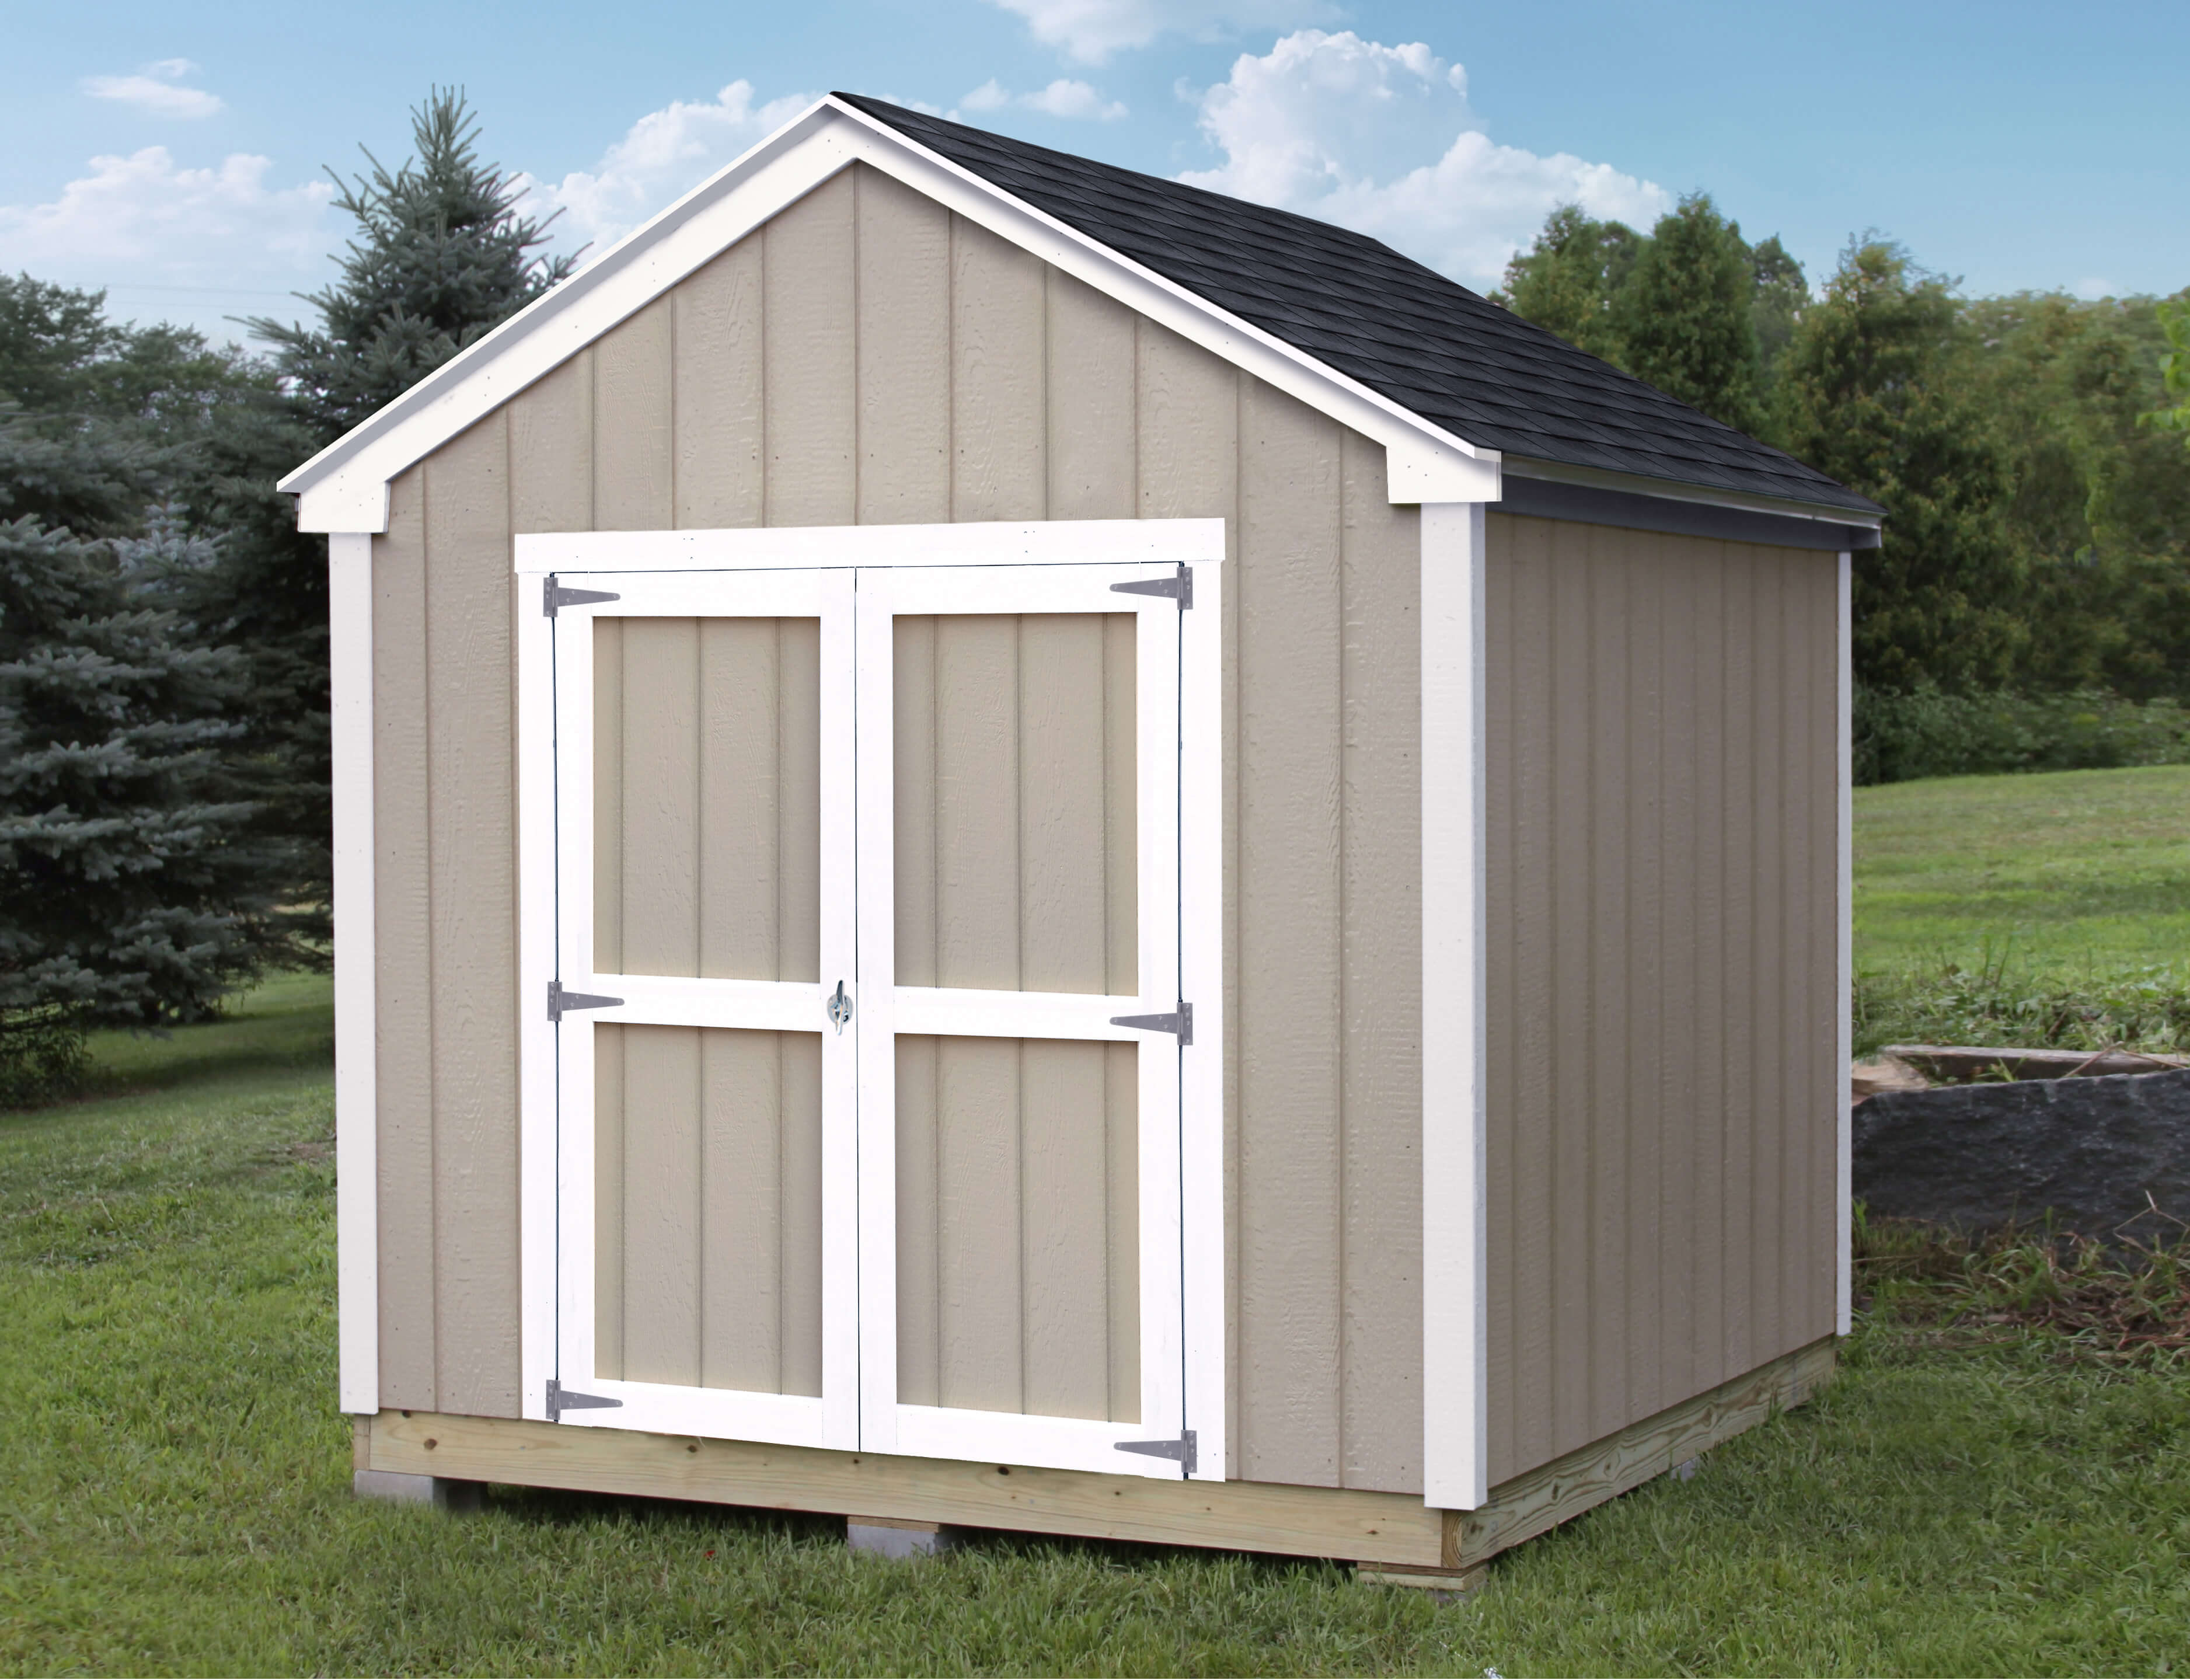 Care and maintenance of the prebuilt sheds